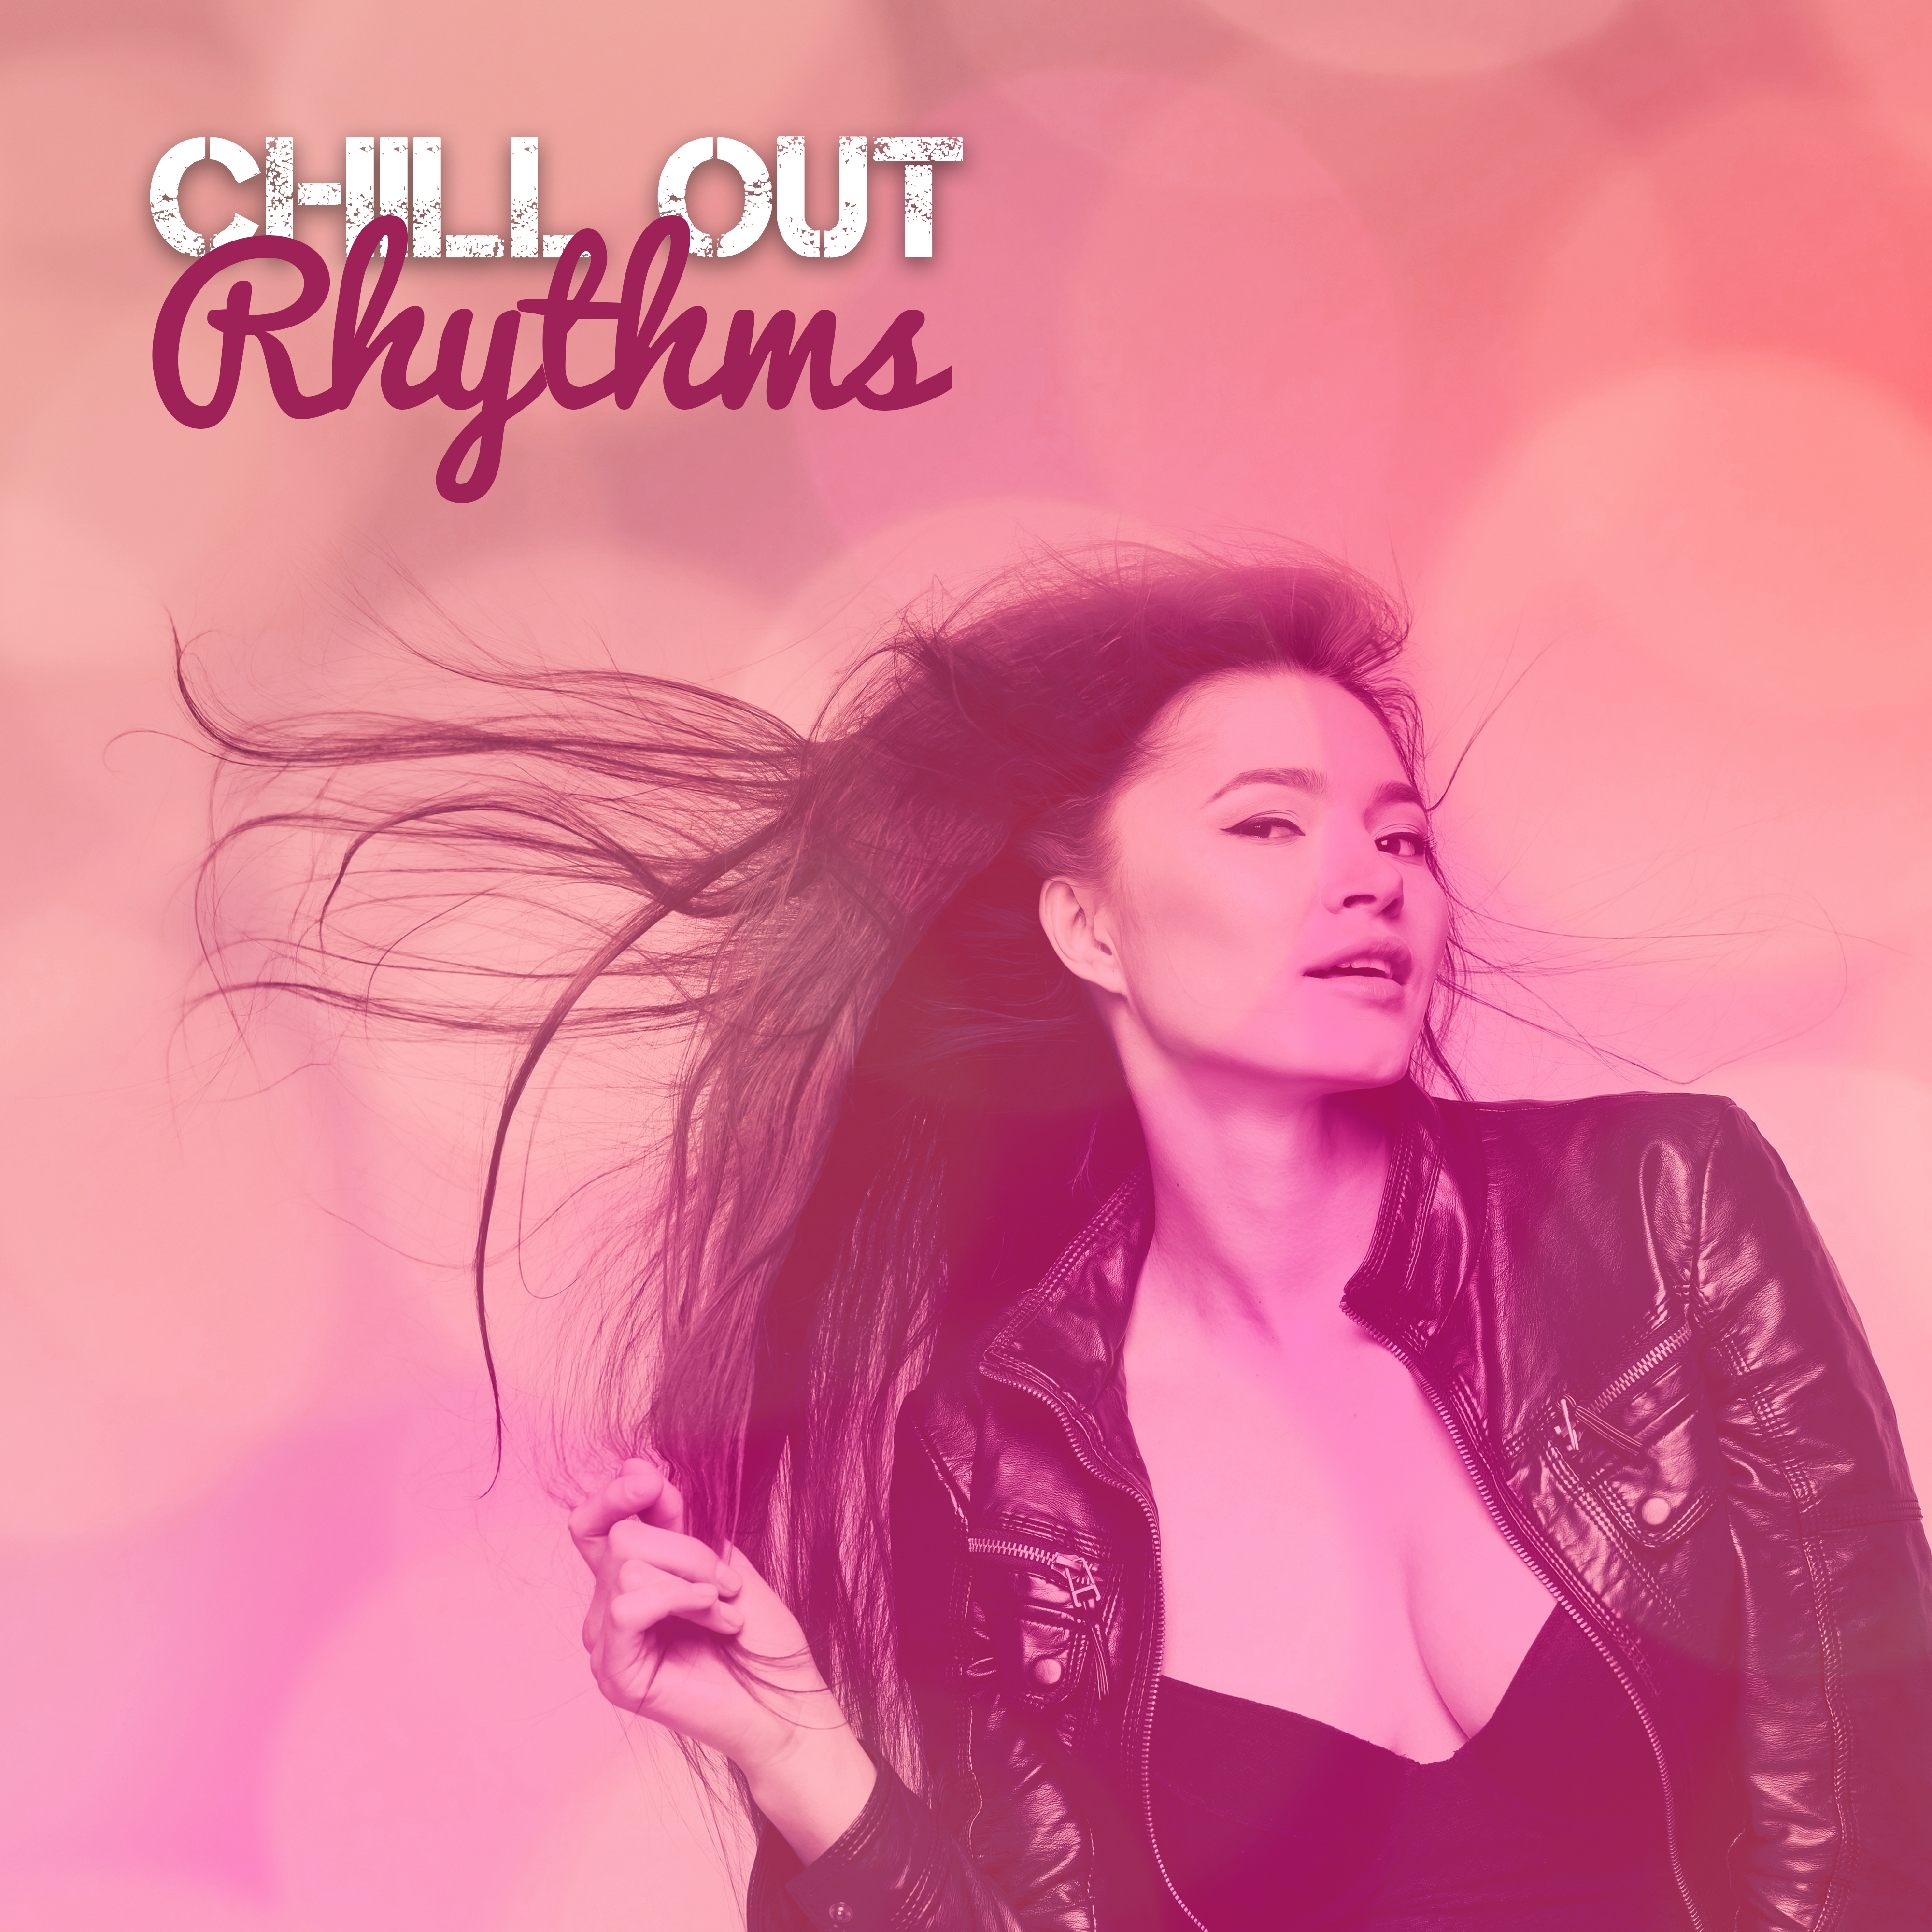 Chill Out Rhythms  Best Summer Music, Holiday 2017, Party Time, Ibiza Sounds